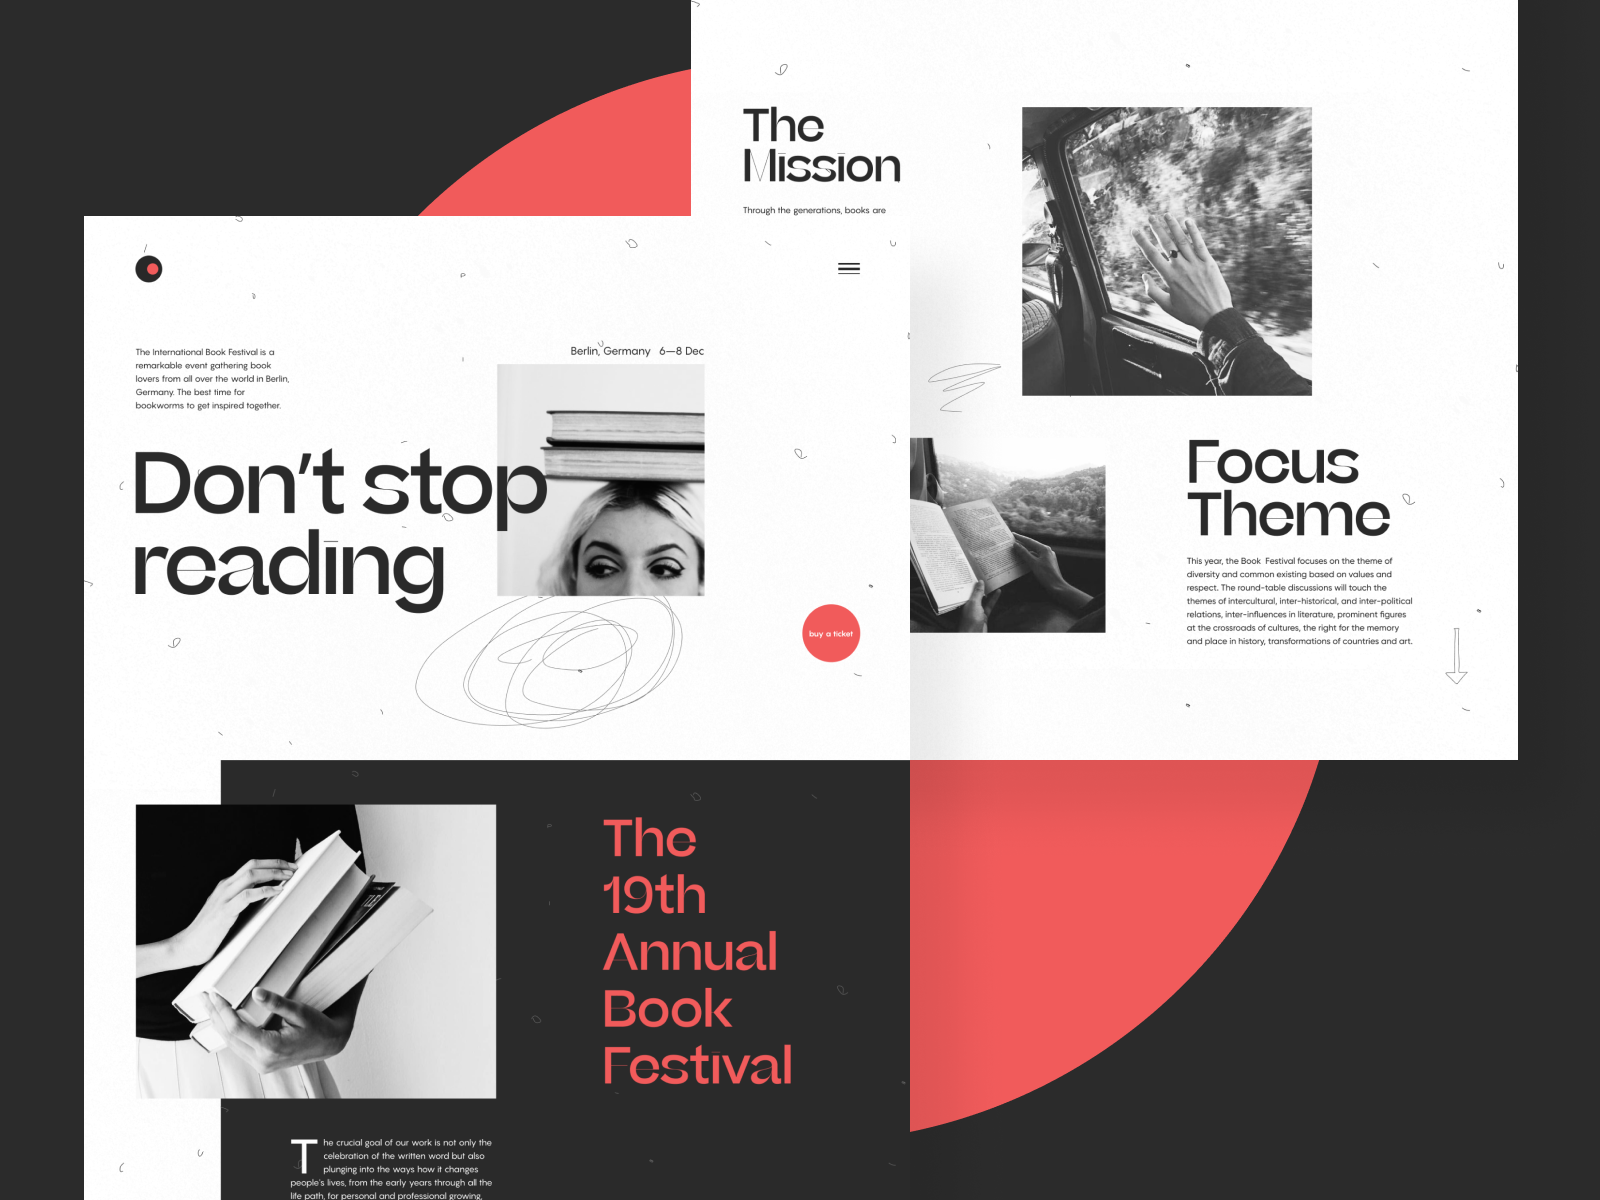 At All Events: Awesome Designs for Event Websites and Landing Pages